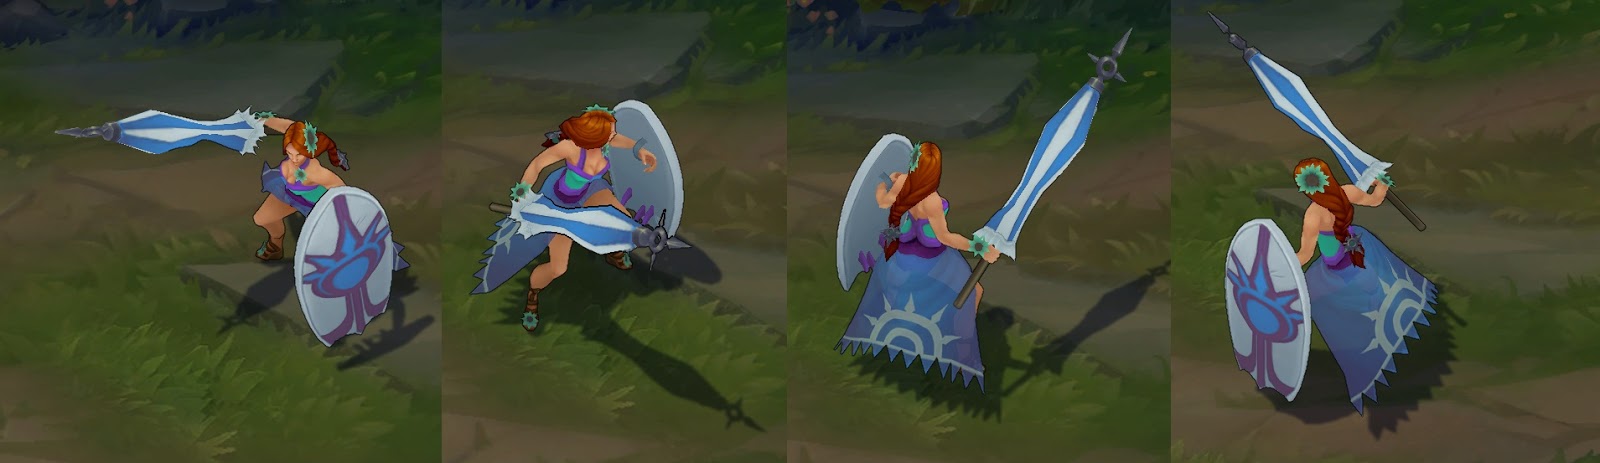 Pool Party Leona: Dawn chroma pack skin for league of legends ingame picture splash art